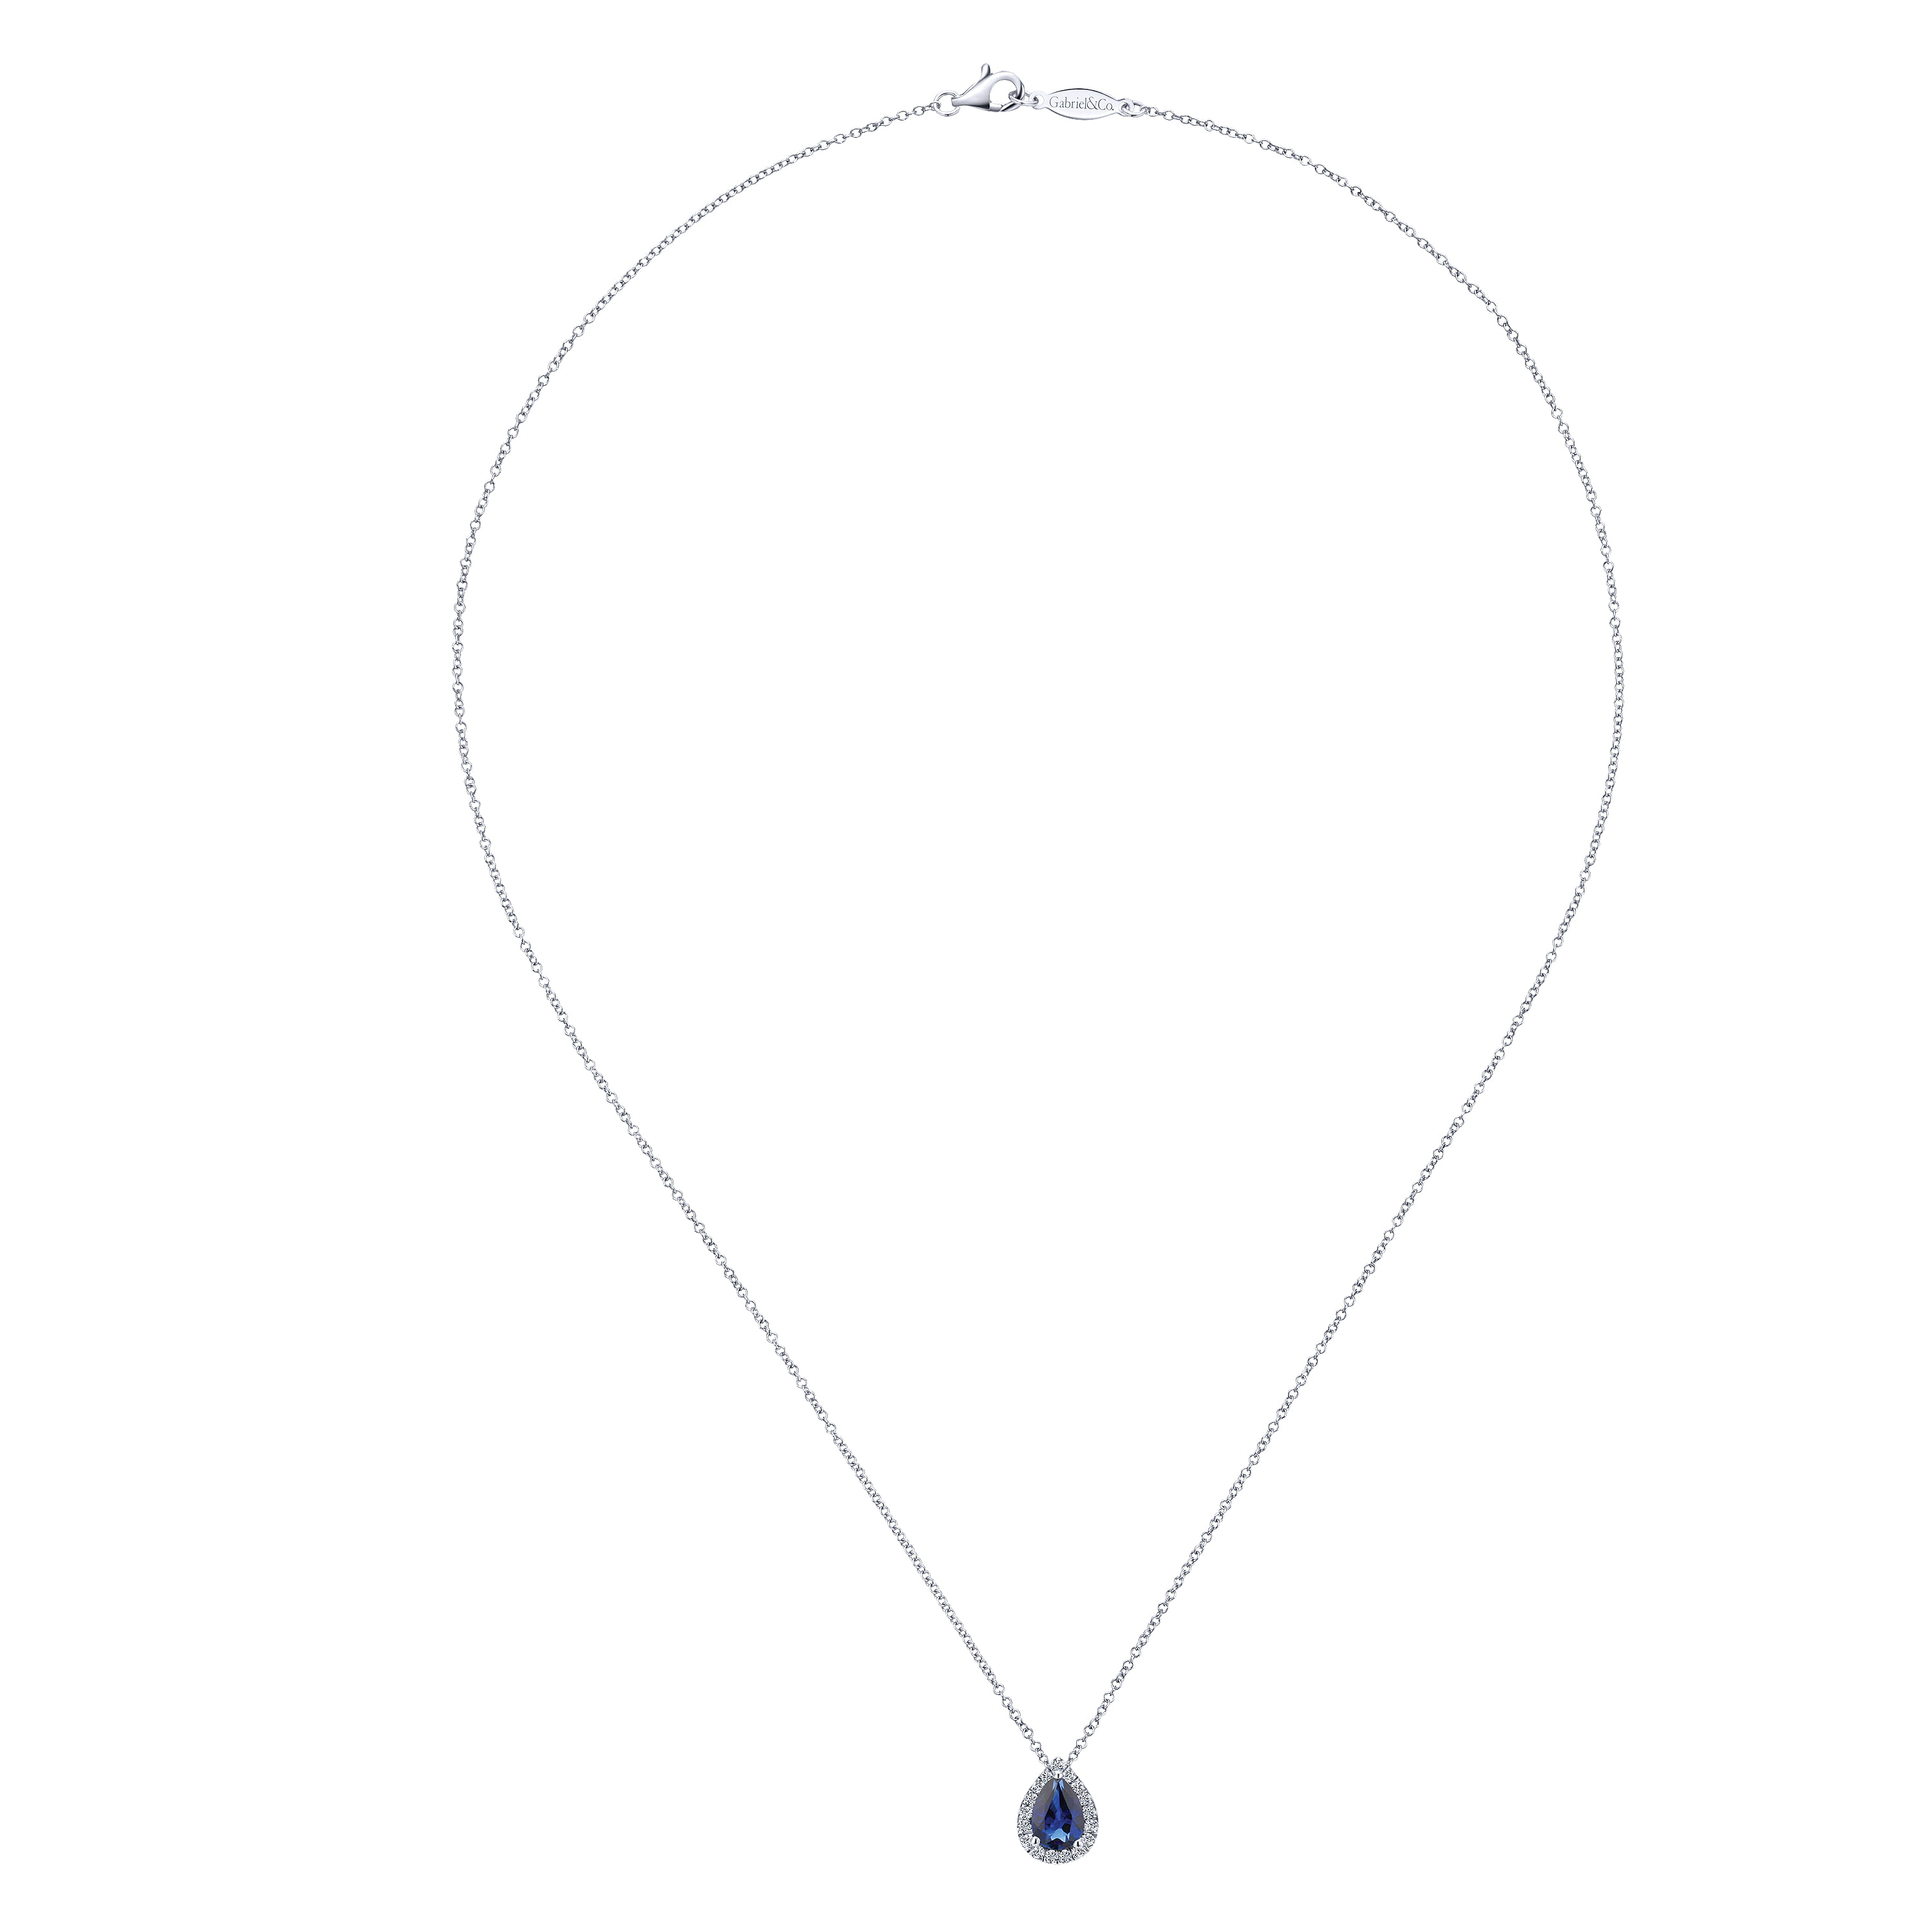 18 inch 14K White Gold Pear Shaped Sapphire and Diamond Halo Pendant Necklace